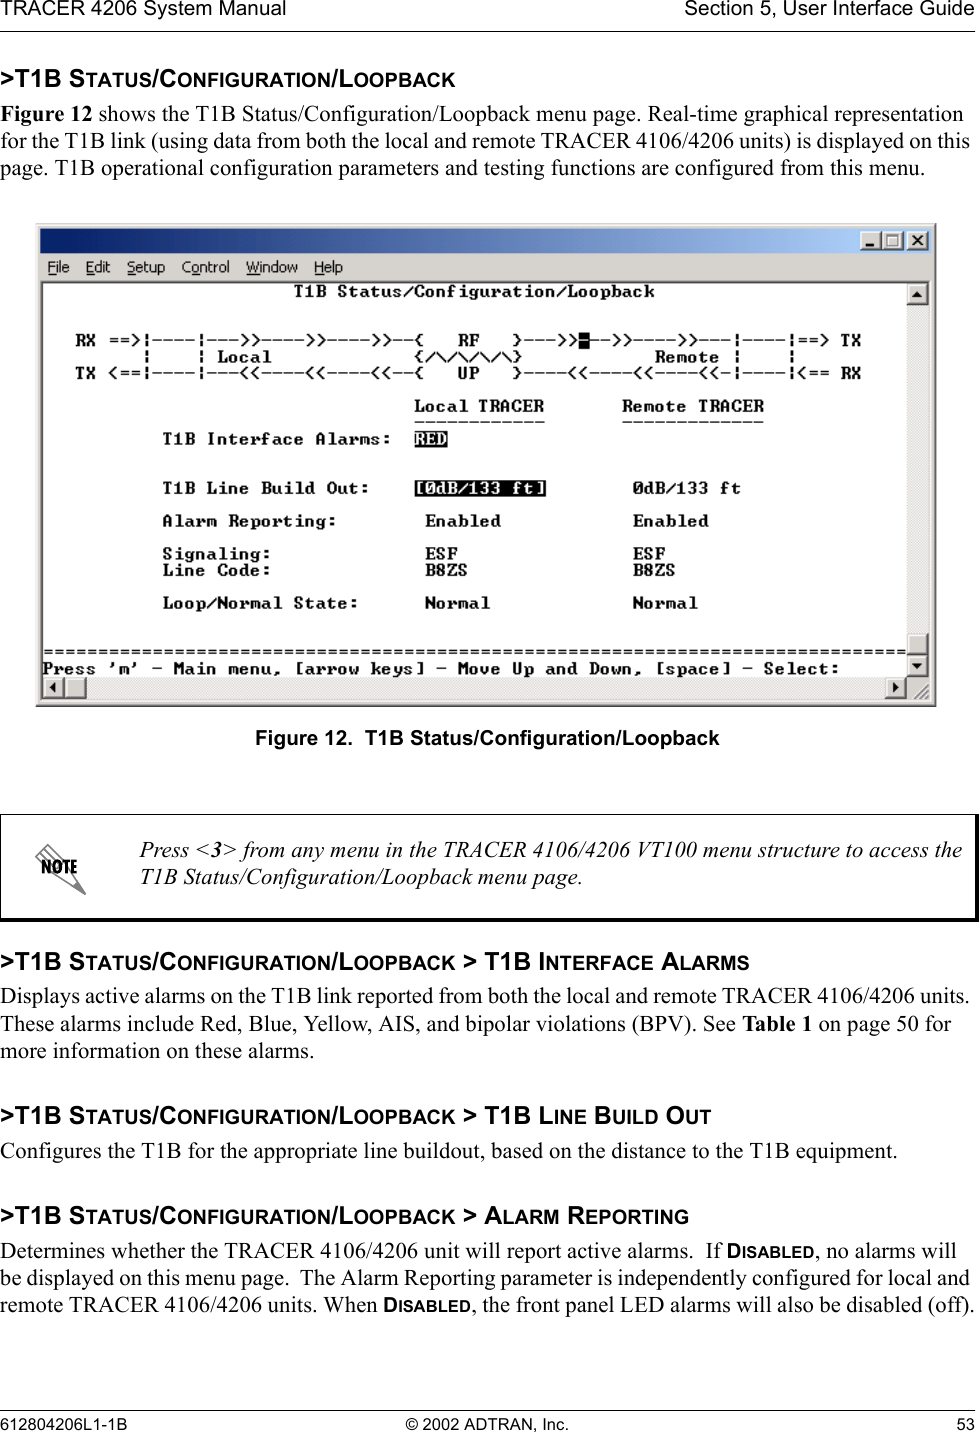 TRACER 4206 System Manual Section 5, User Interface Guide612804206L1-1B © 2002 ADTRAN, Inc. 53&gt;T1B STATUS/CONFIGURATION/LOOPBACKFigure 12 shows the T1B Status/Configuration/Loopback menu page. Real-time graphical representation for the T1B link (using data from both the local and remote TRACER 4106/4206 units) is displayed on this page. T1B operational configuration parameters and testing functions are configured from this menu.Figure 12.  T1B Status/Configuration/Loopback&gt;T1B STATUS/CONFIGURATION/LOOPBACK &gt; T1B INTERFACE ALARMSDisplays active alarms on the T1B link reported from both the local and remote TRACER 4106/4206 units. These alarms include Red, Blue, Yellow, AIS, and bipolar violations (BPV). See Tabl e 1 on page 50 for more information on these alarms.&gt;T1B STATUS/CONFIGURATION/LOOPBACK &gt; T1B LINE BUILD OUTConfigures the T1B for the appropriate line buildout, based on the distance to the T1B equipment.  &gt;T1B STATUS/CONFIGURATION/LOOPBACK &gt; ALARM REPORTINGDetermines whether the TRACER 4106/4206 unit will report active alarms.  If DISABLED, no alarms will be displayed on this menu page.  The Alarm Reporting parameter is independently configured for local and remote TRACER 4106/4206 units. When DISABLED, the front panel LED alarms will also be disabled (off).Press &lt;3&gt; from any menu in the TRACER 4106/4206 VT100 menu structure to access the T1B Status/Configuration/Loopback menu page.